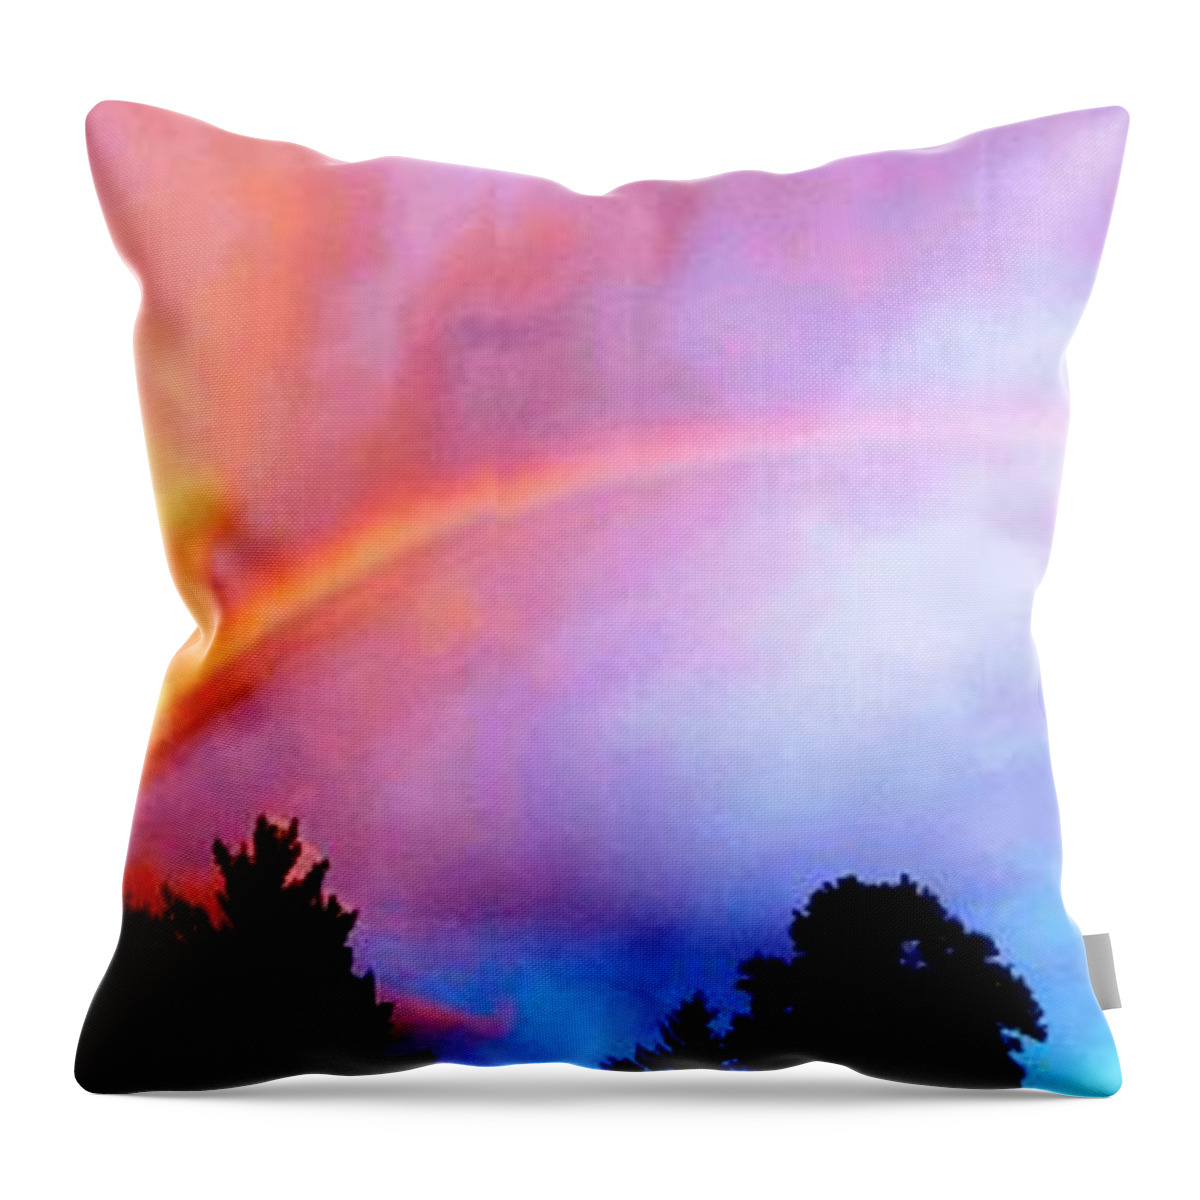  Throw Pillow featuring the photograph Rainbow From Heaven On Earth by Daniel Thompson